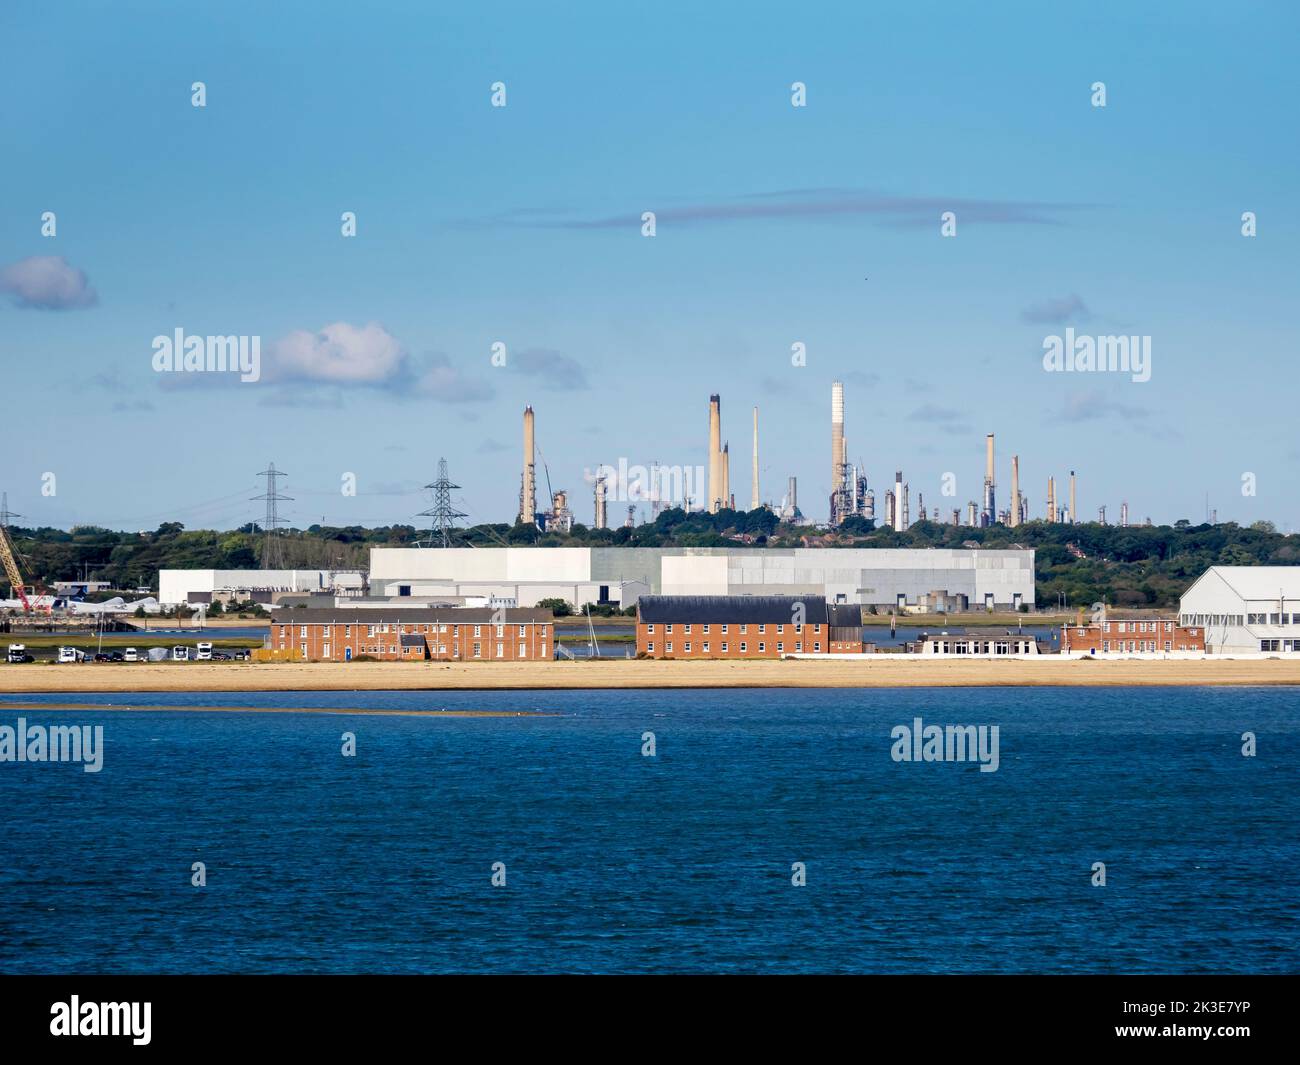 The Fawley oil refinery on the outskirts of Southampton, Hampshire, UK. Stock Photo